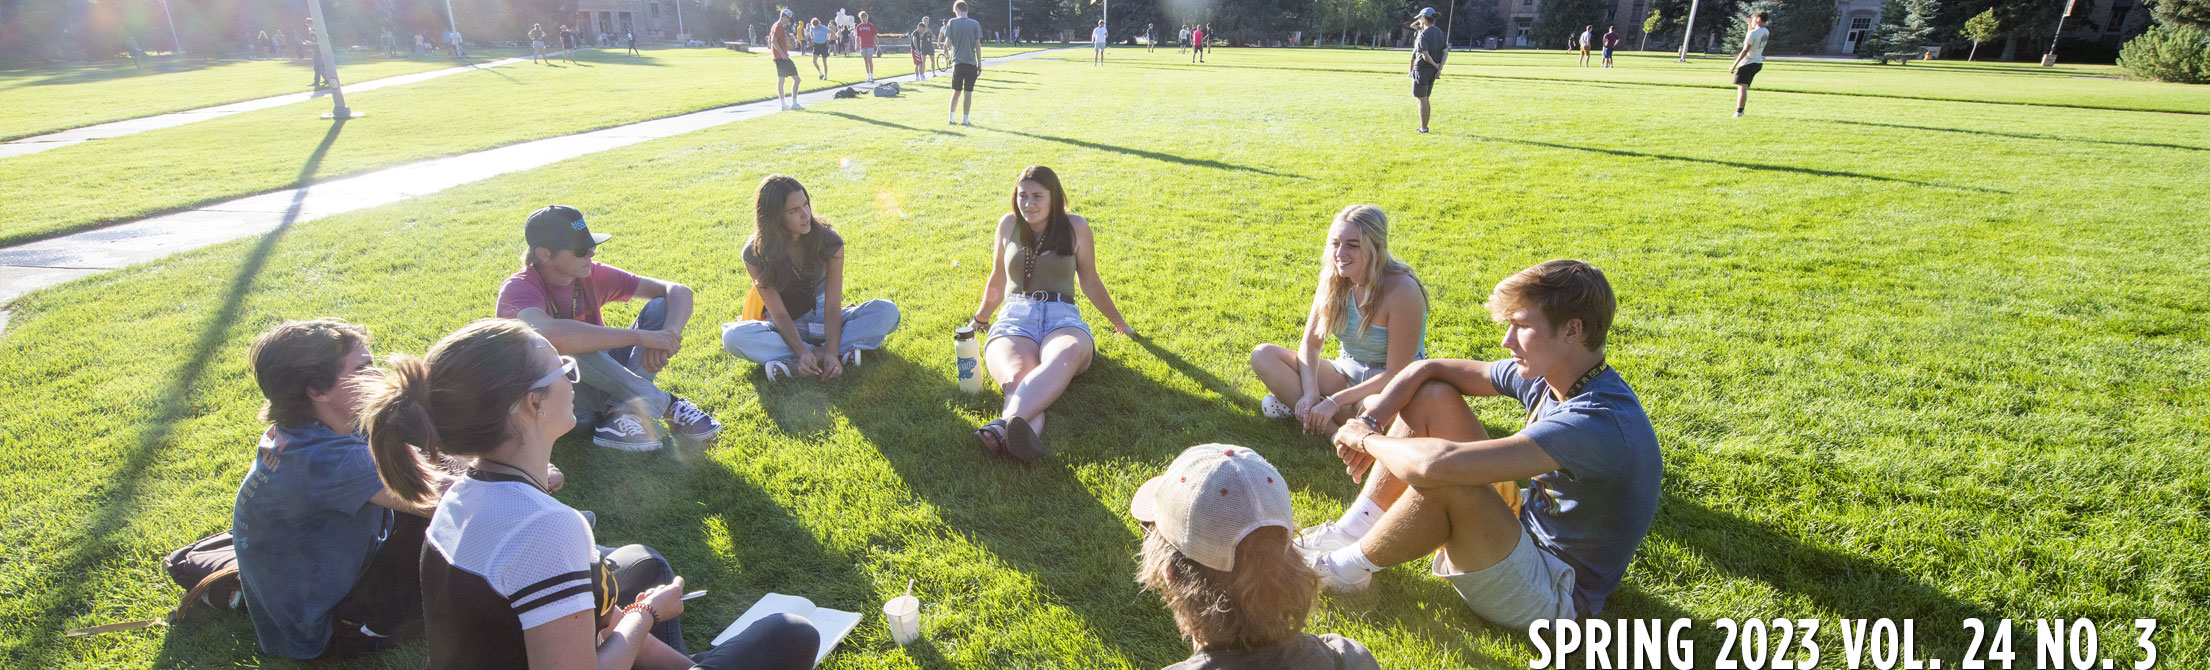 people sitting in a circle in the grass